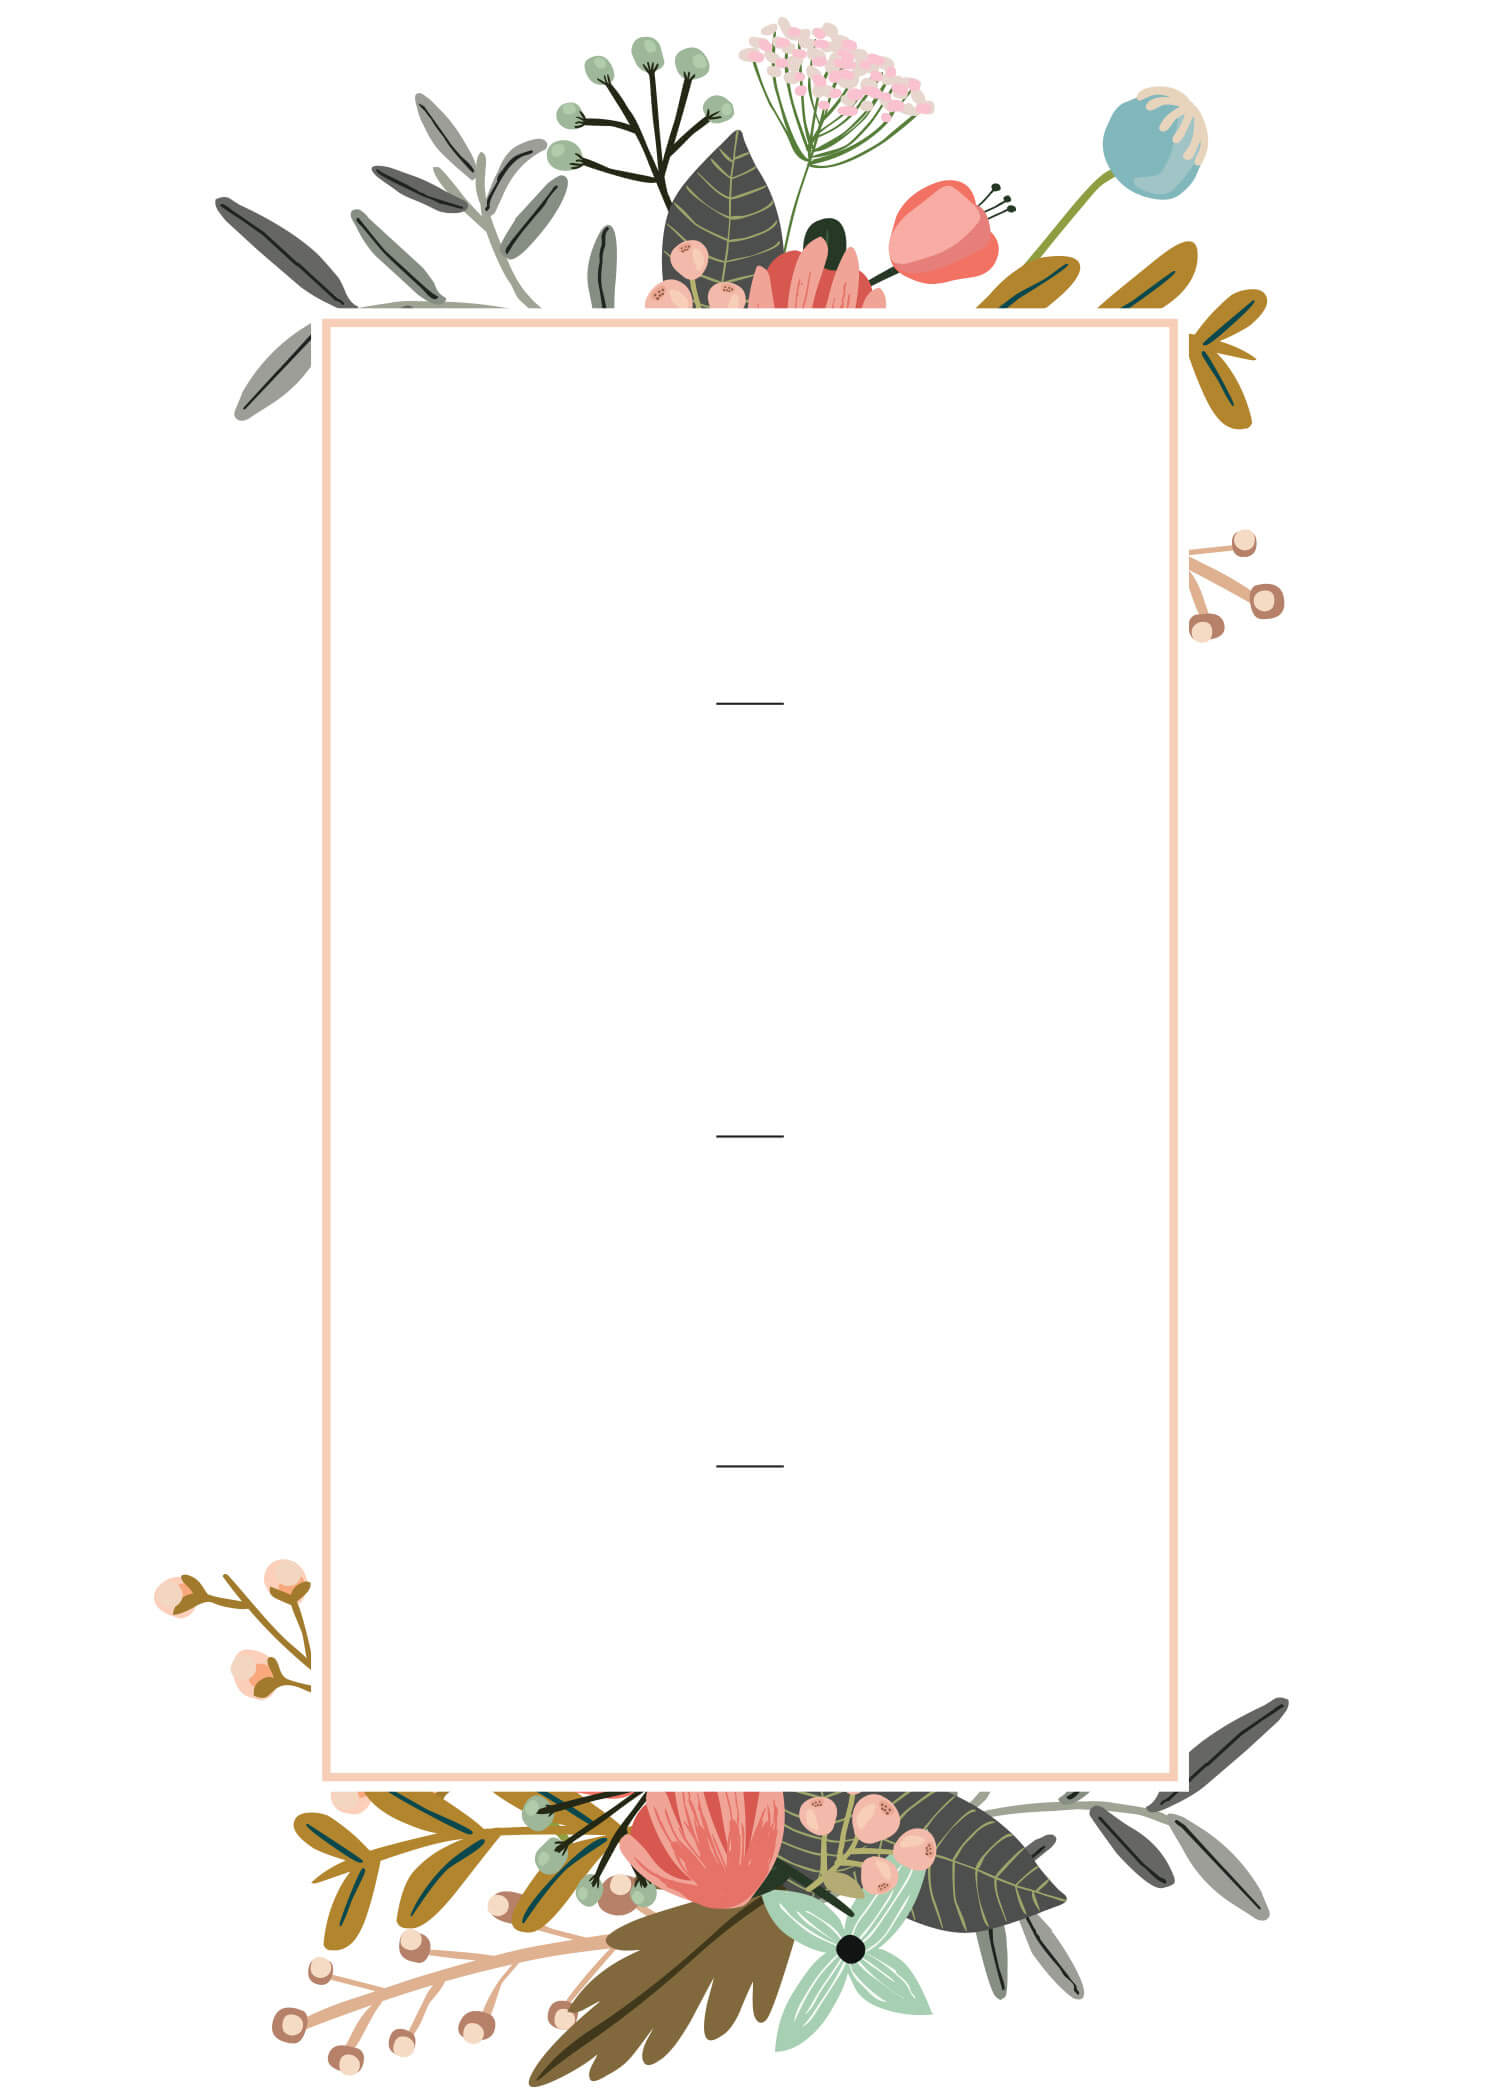 Editable Wedding Invitation Templates For The Perfect Card Intended For Invitation Cards Templates For Marriage